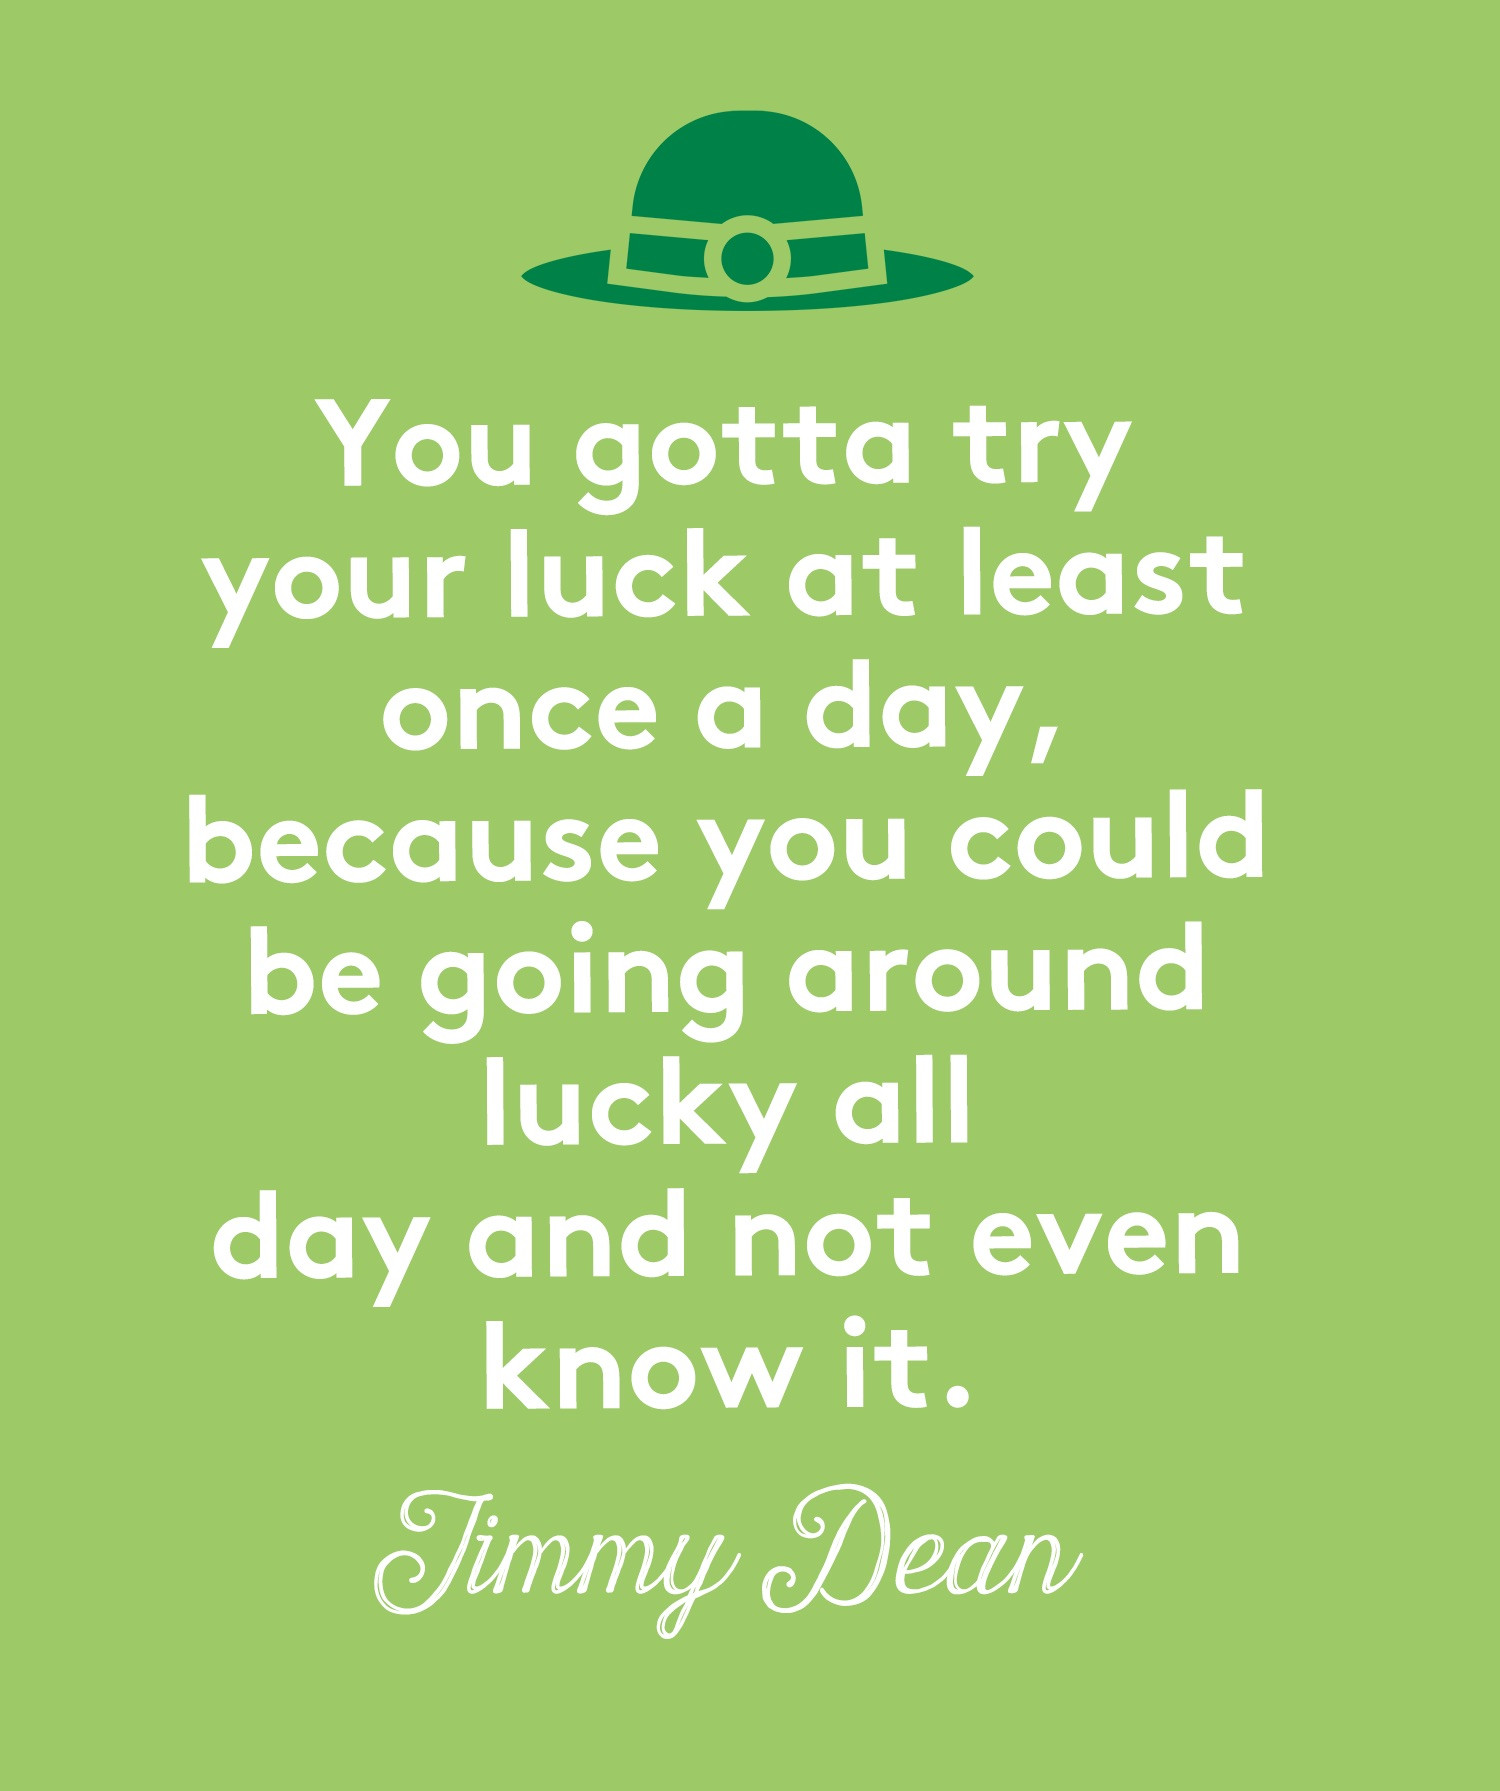 Saint Patrick's Day Quotes
 9 St Patrick’s Day Memes and Quotes You’ll Send to